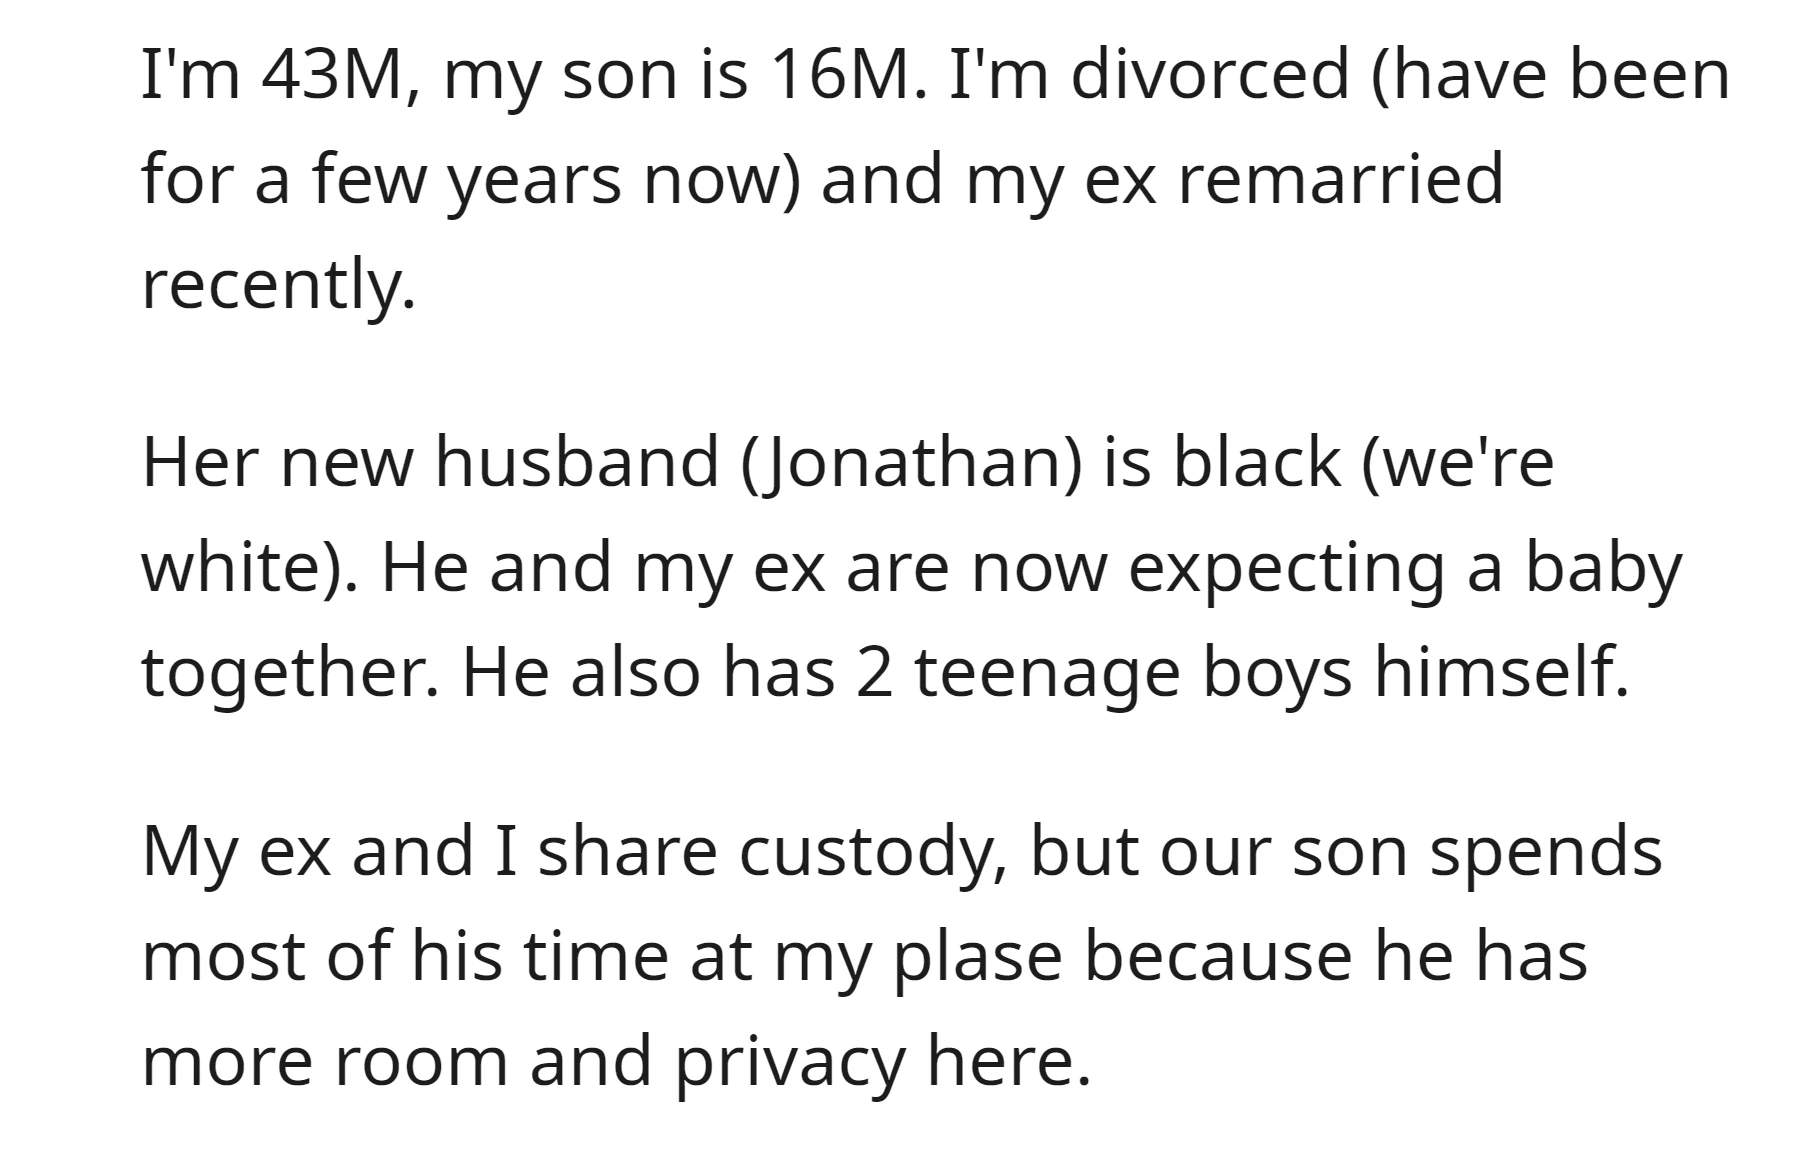 OP gets divorced and his son primarily stays with him due to more space and privacy